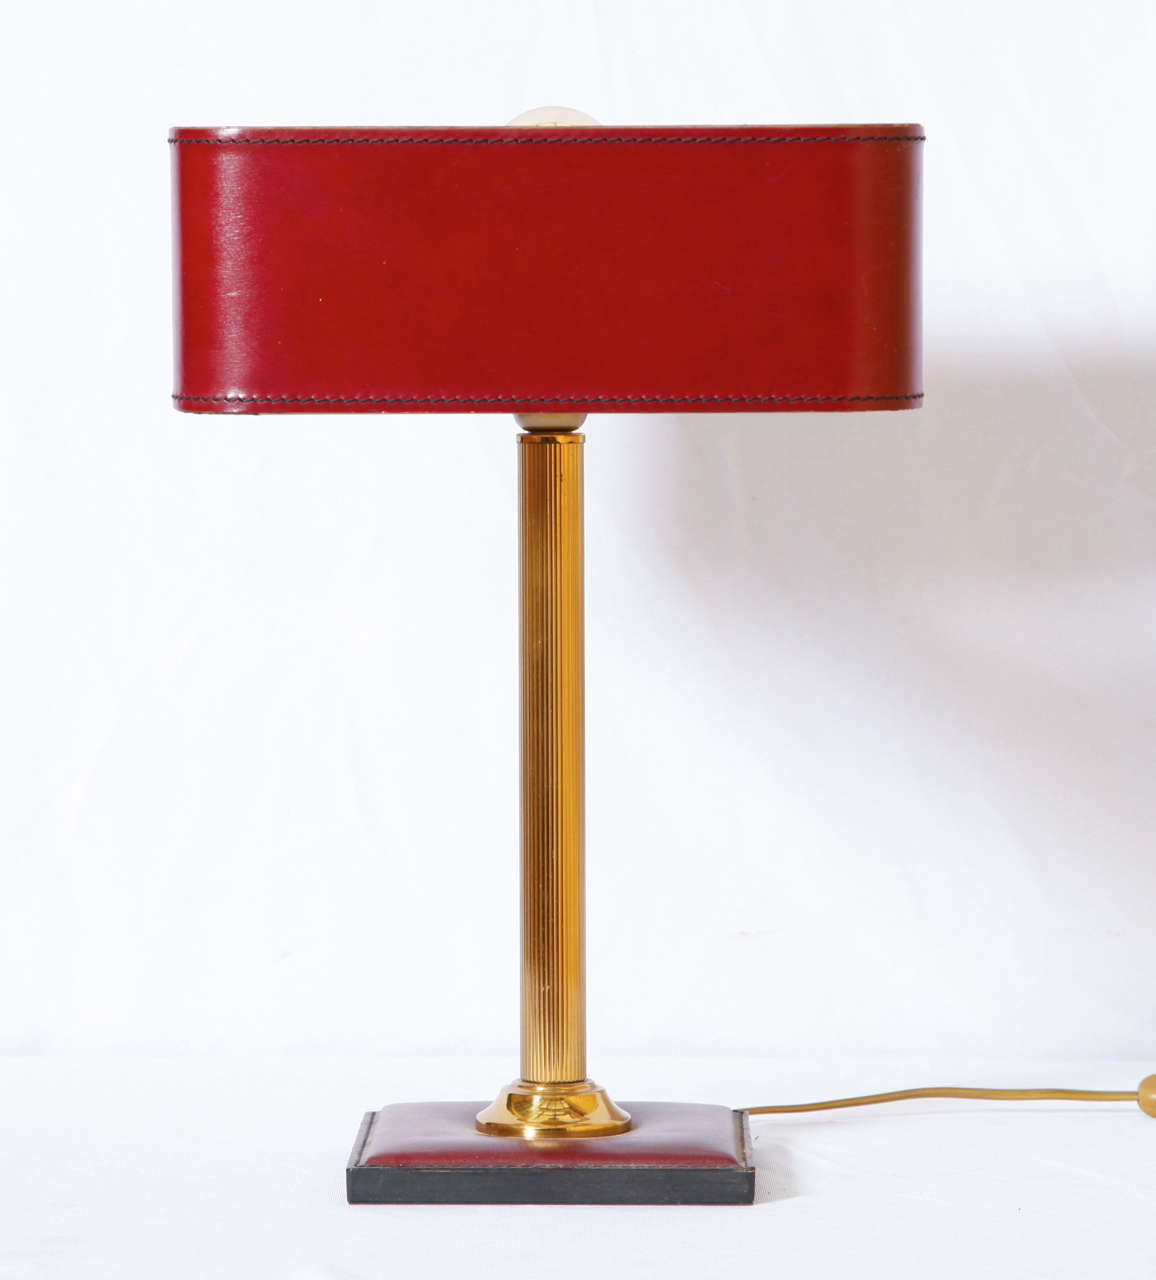 Jacques Adnet (1900 - 1984) designed this beautiful and useful table lamp shortly after World War II. Brass stem and saddled stitched blood red leather.